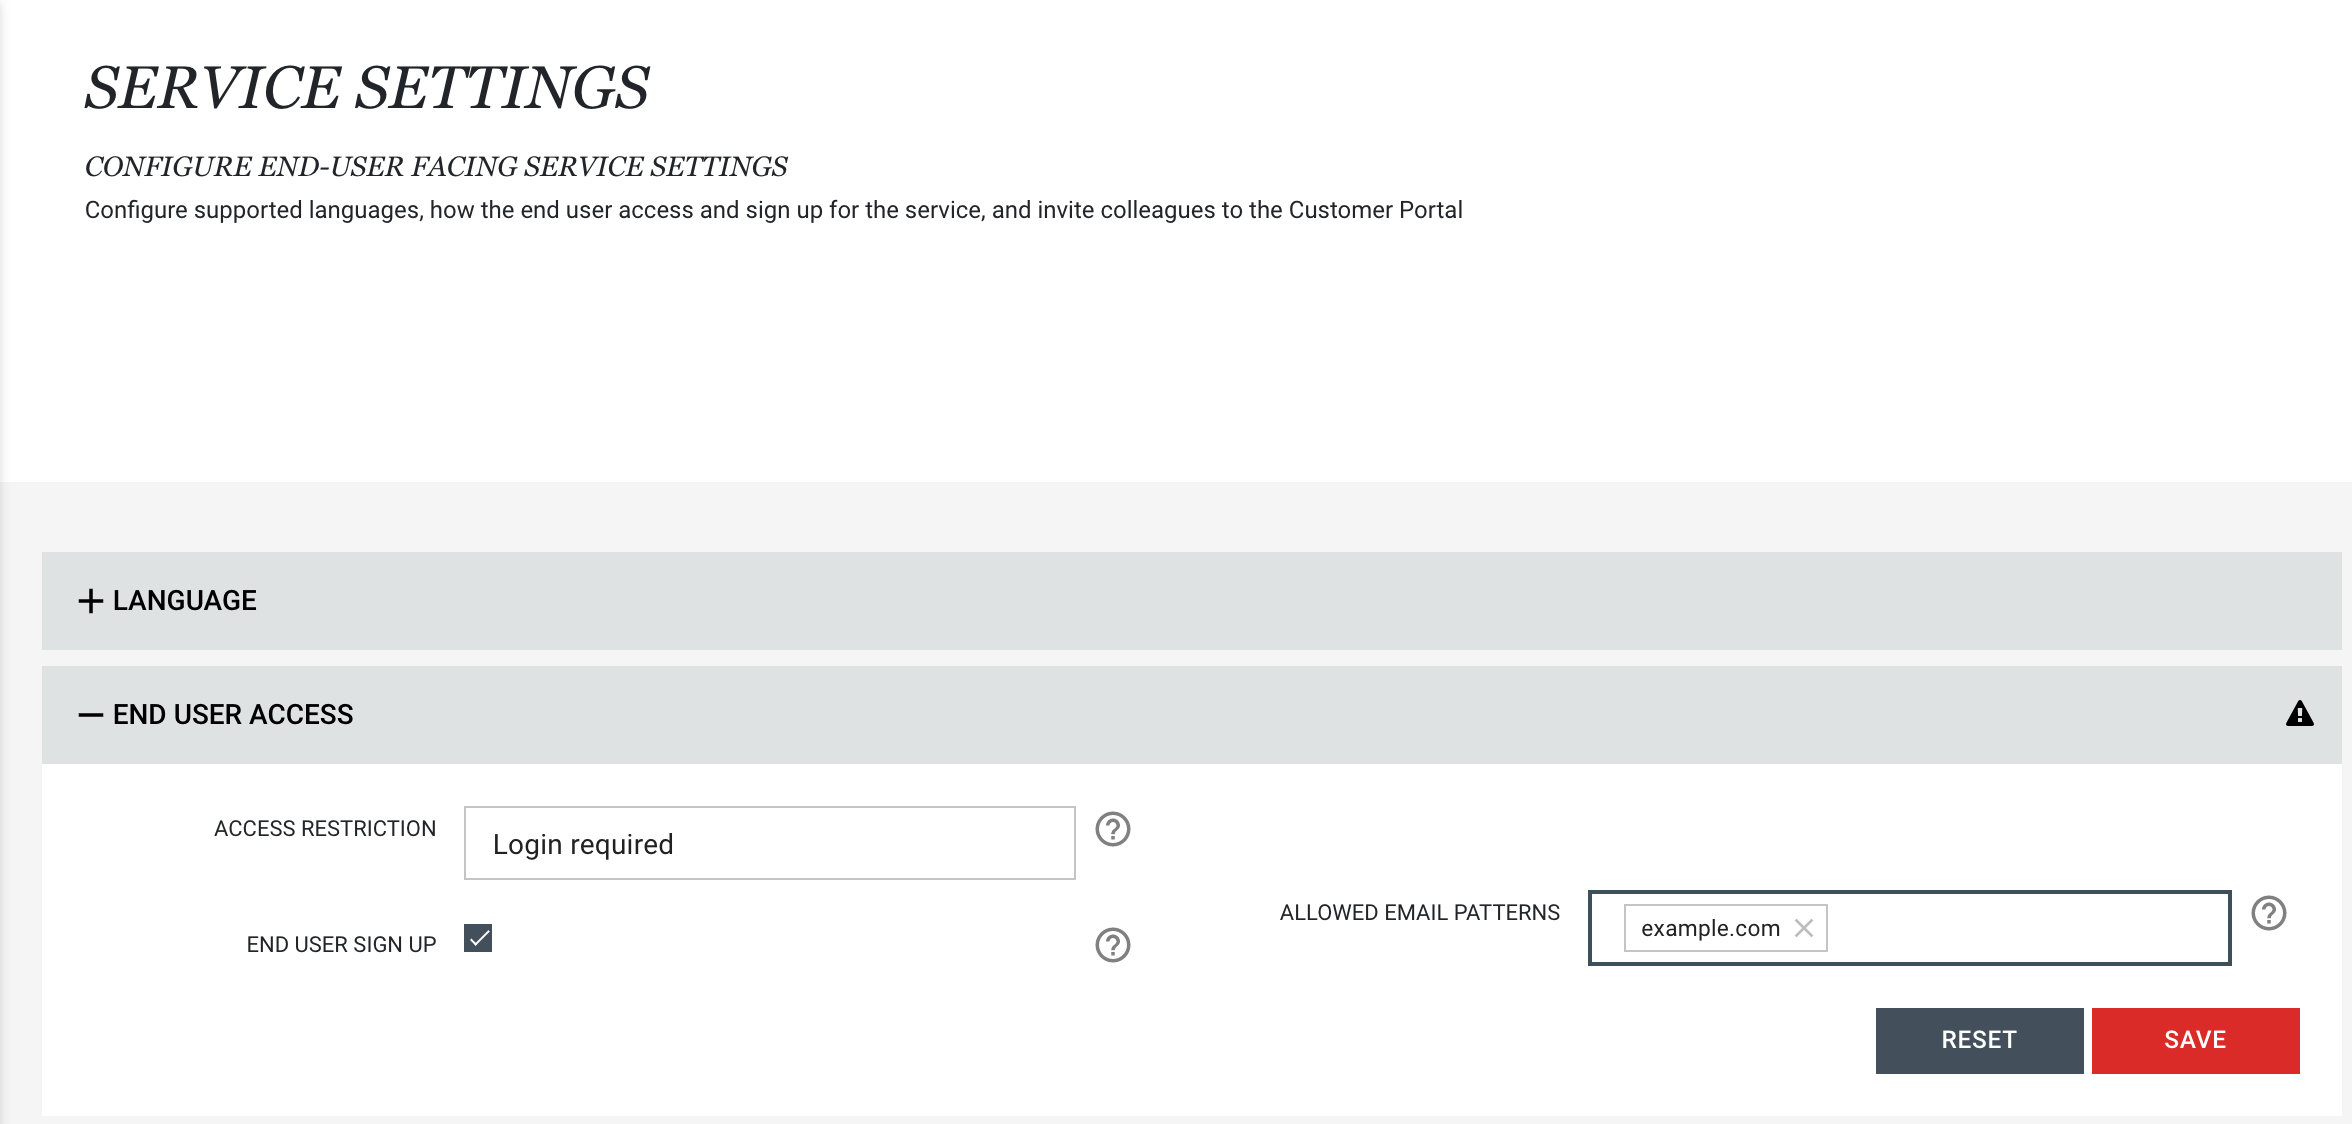 Customer Portal End User Access - Login is Required